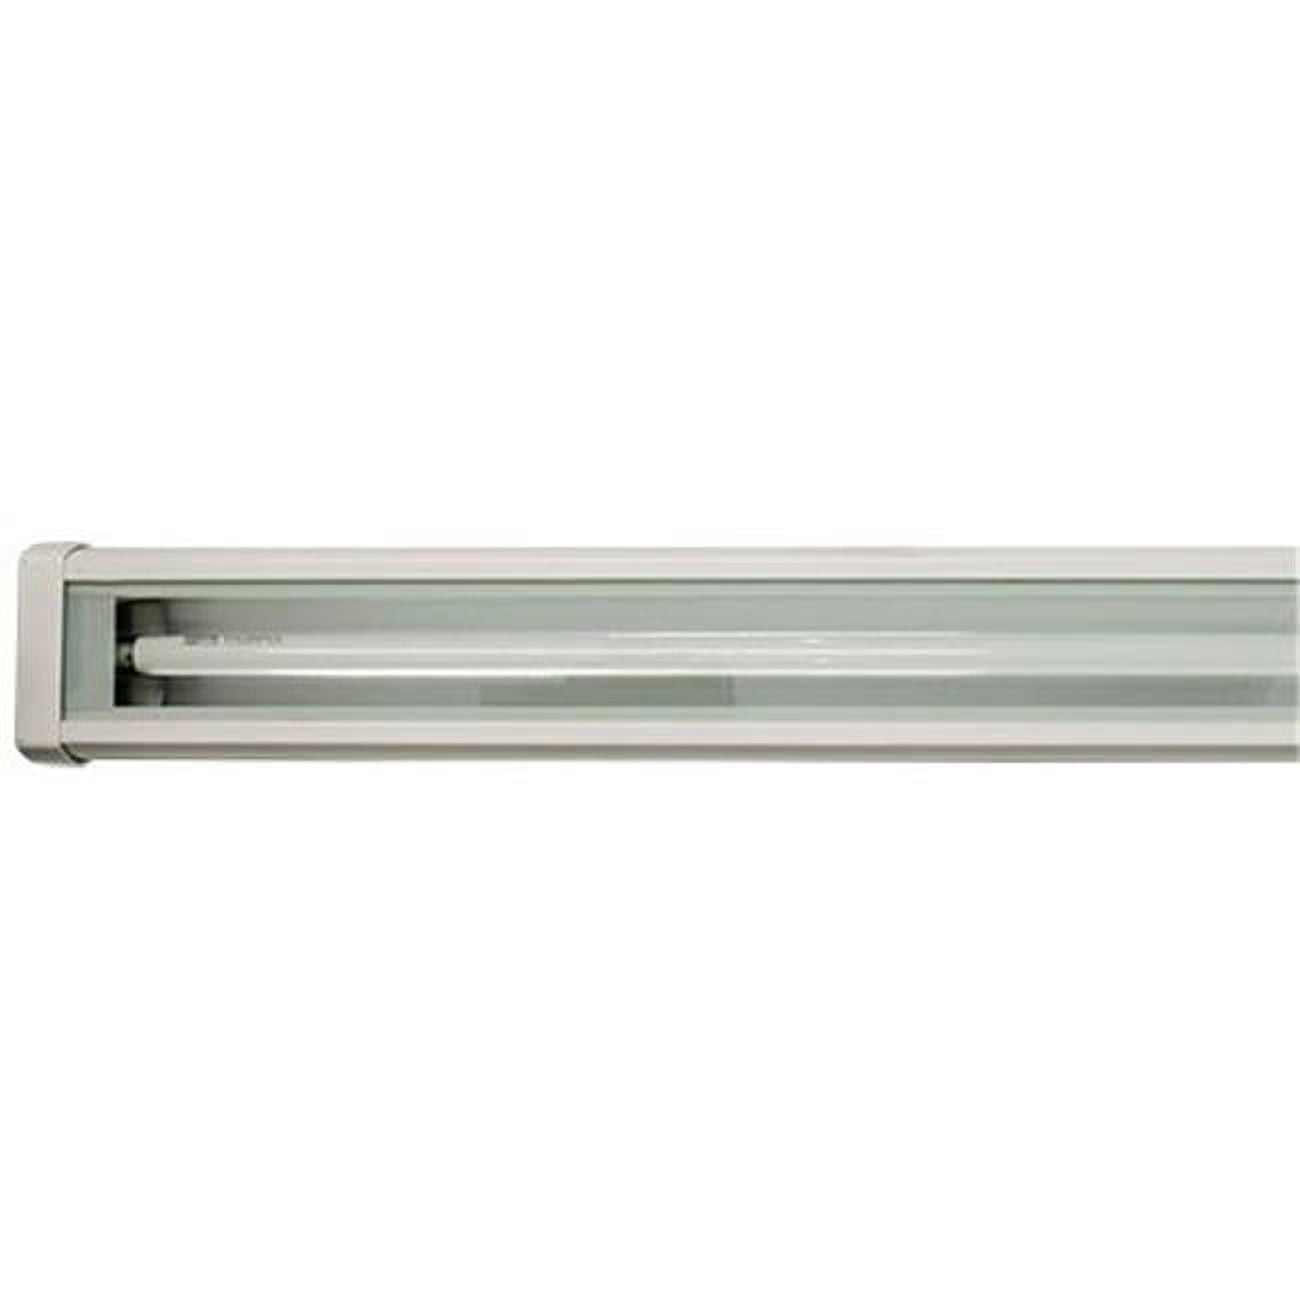 Picture of Dabmar Lighting DF9402-W Flourescent Linear Flood & Sign Light Fixture - 47.65 in. 28W F28T5 120V, White - 3.52 x 47.63 x 2.75 in.